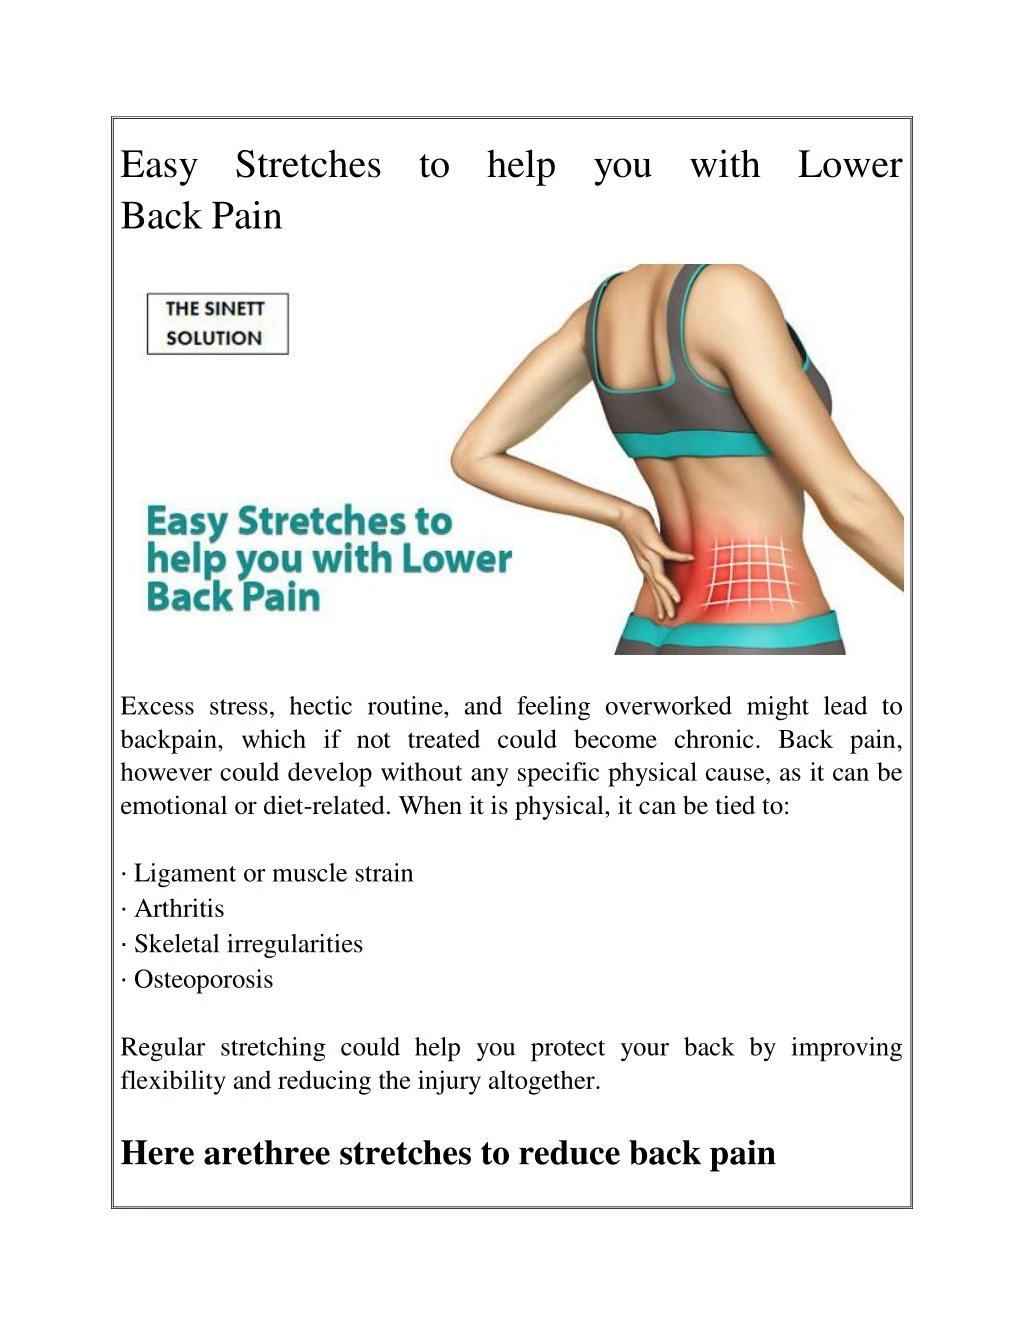 easy stretches to help you with lower back pain